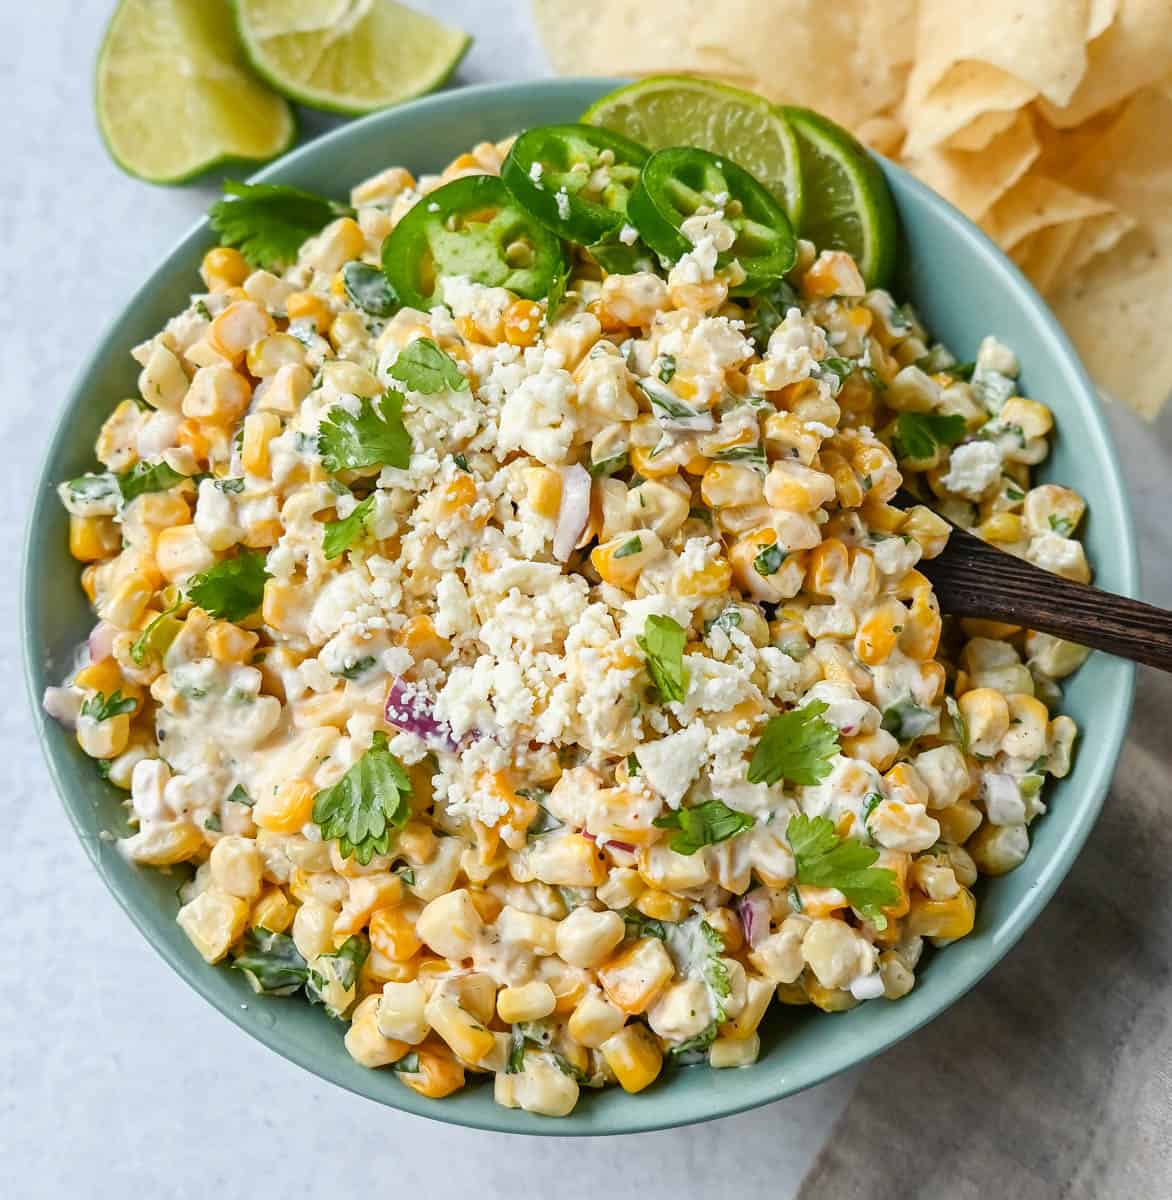 Inspired by Mexican street corn, this dip is made with sweet roasted corn and mixed with red onion, cilantro, jalapeño, lime juice, mexican spices, a touch of mayo, and cotija cheese.